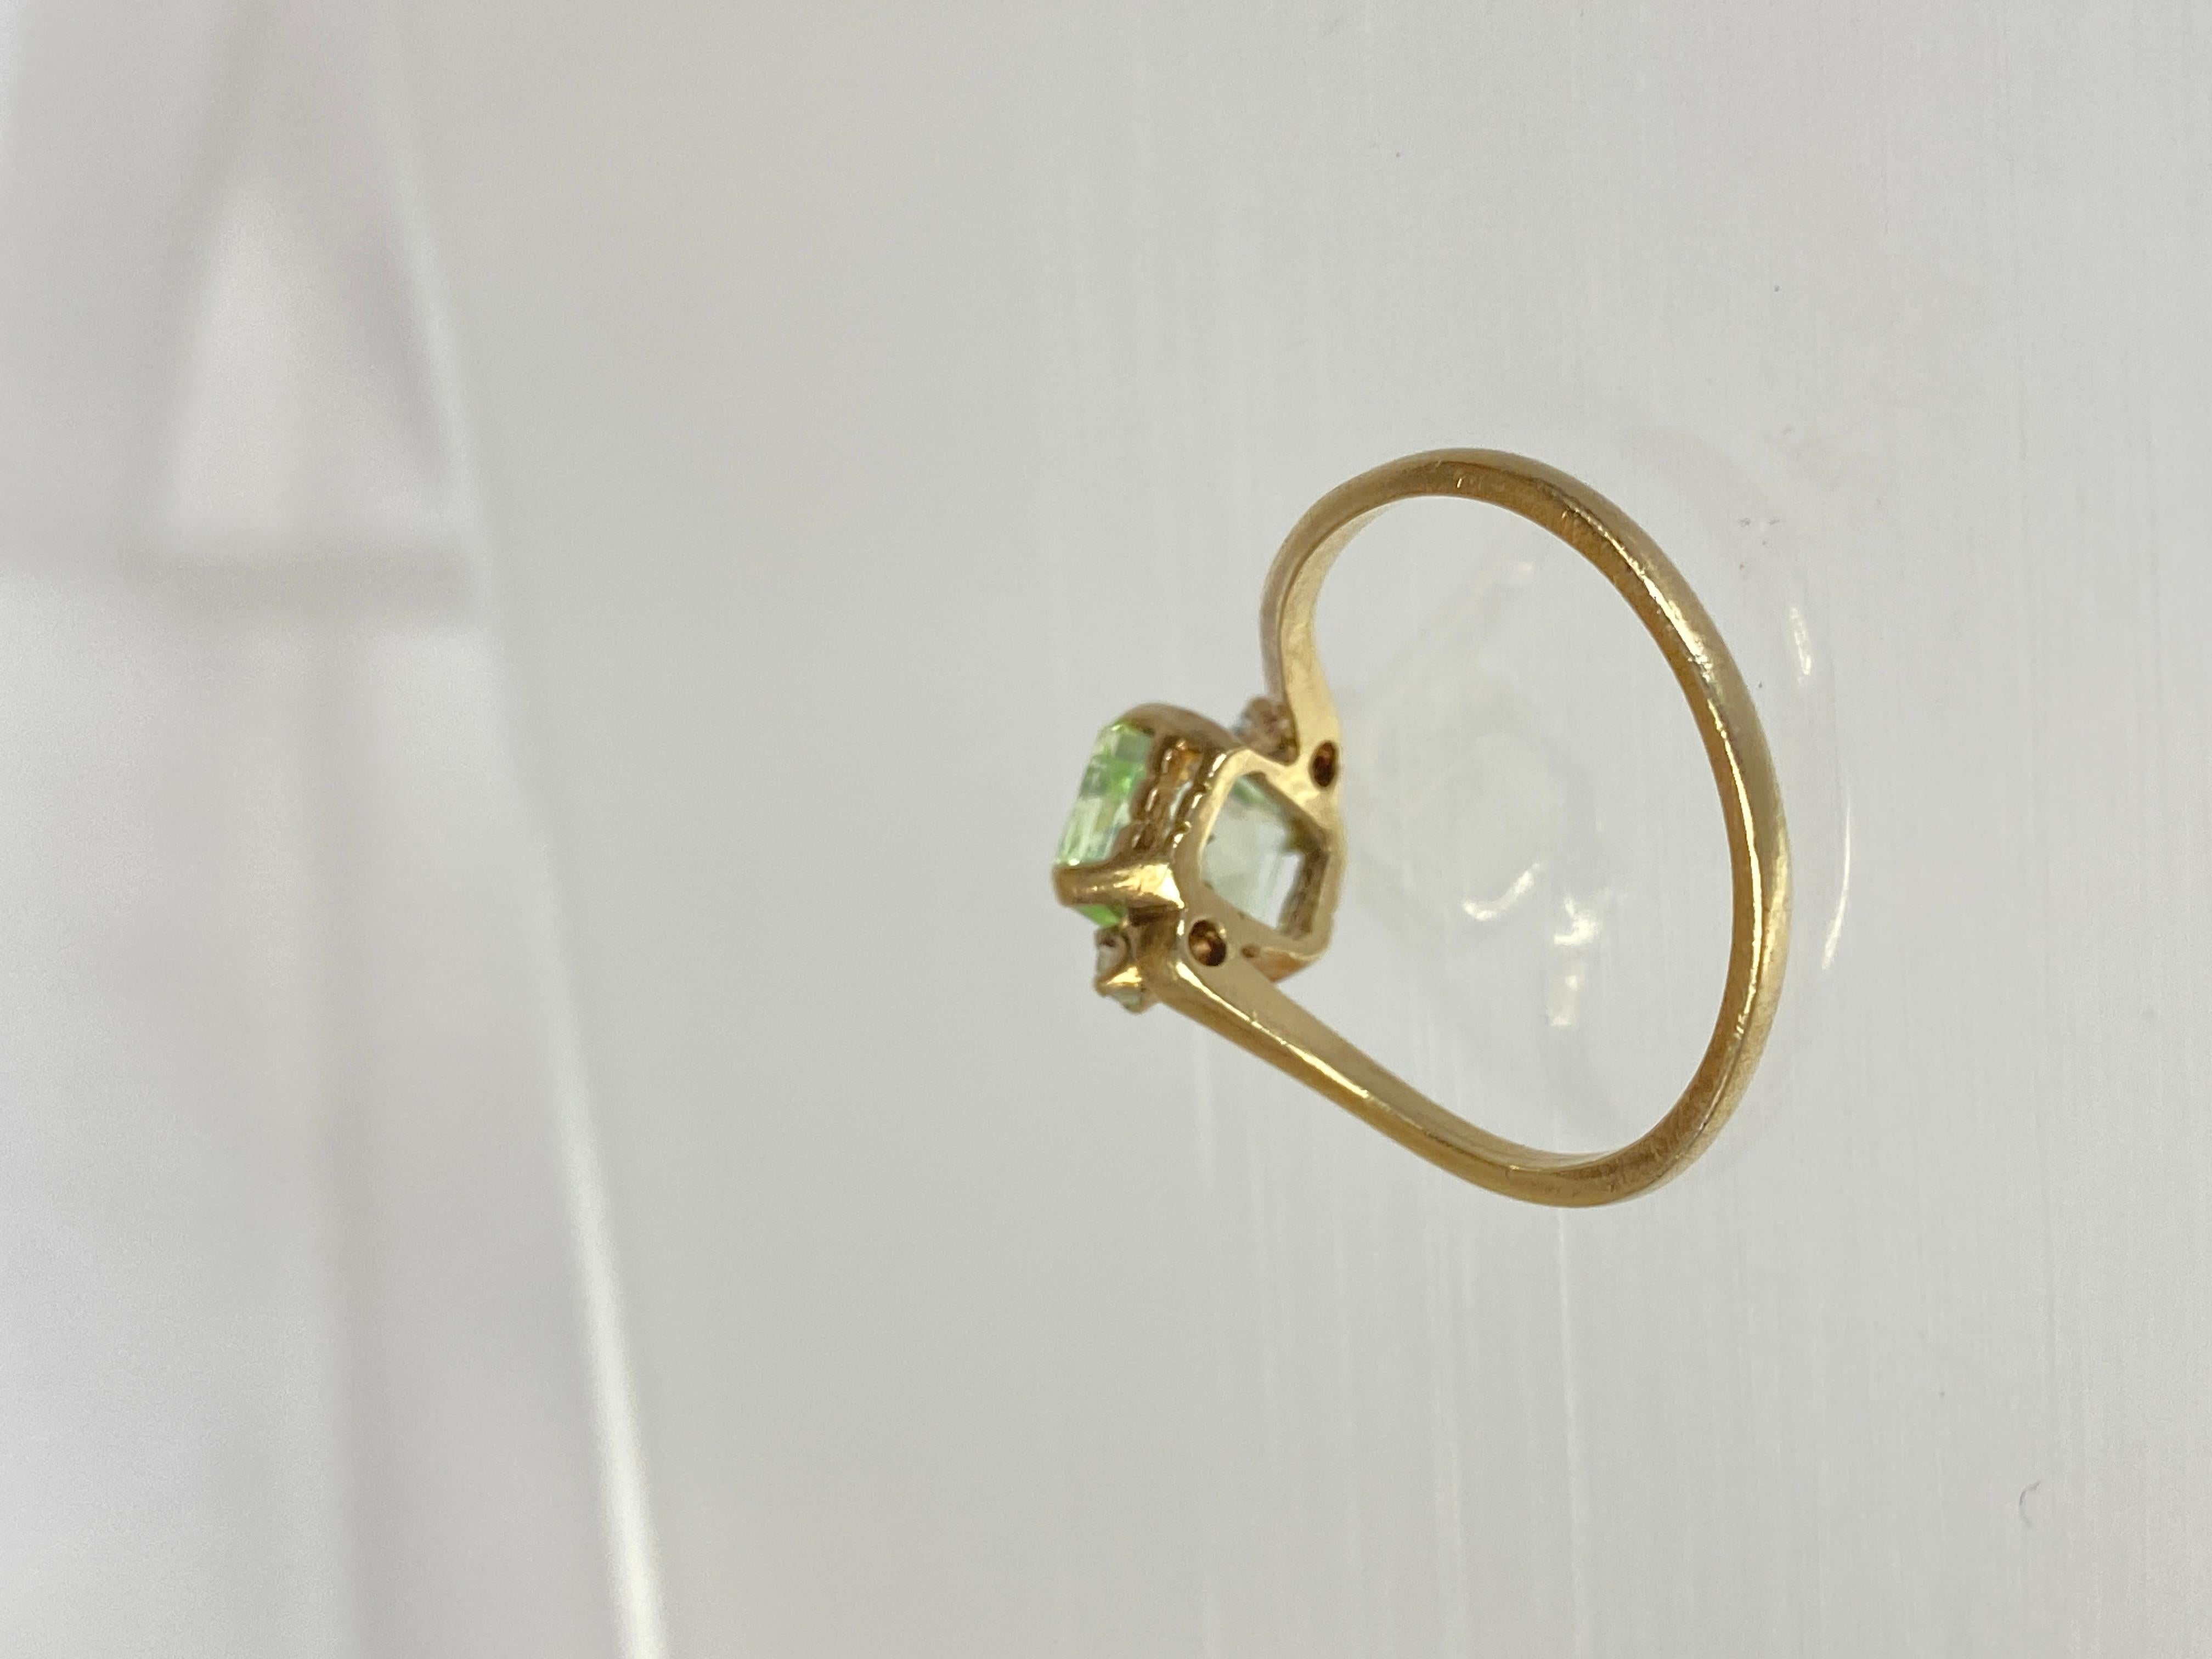 10K Yellow Gold Old Fashioned Emerald Cut Green Beryl Solitaire Ring Size 8.25 3